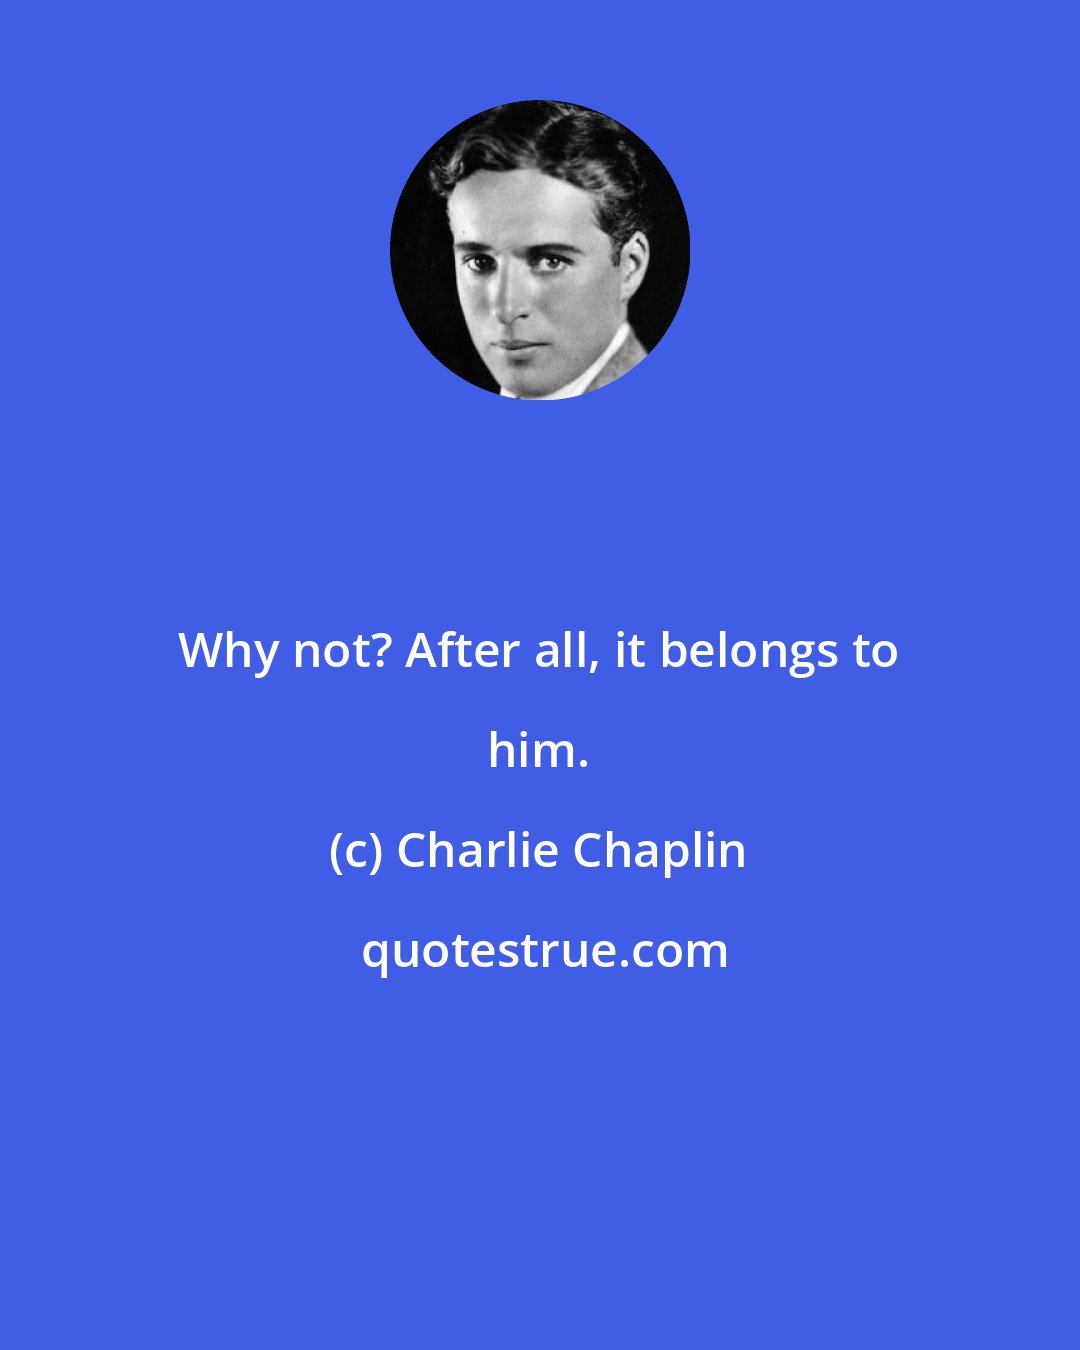 Charlie Chaplin: Why not? After all, it belongs to him.